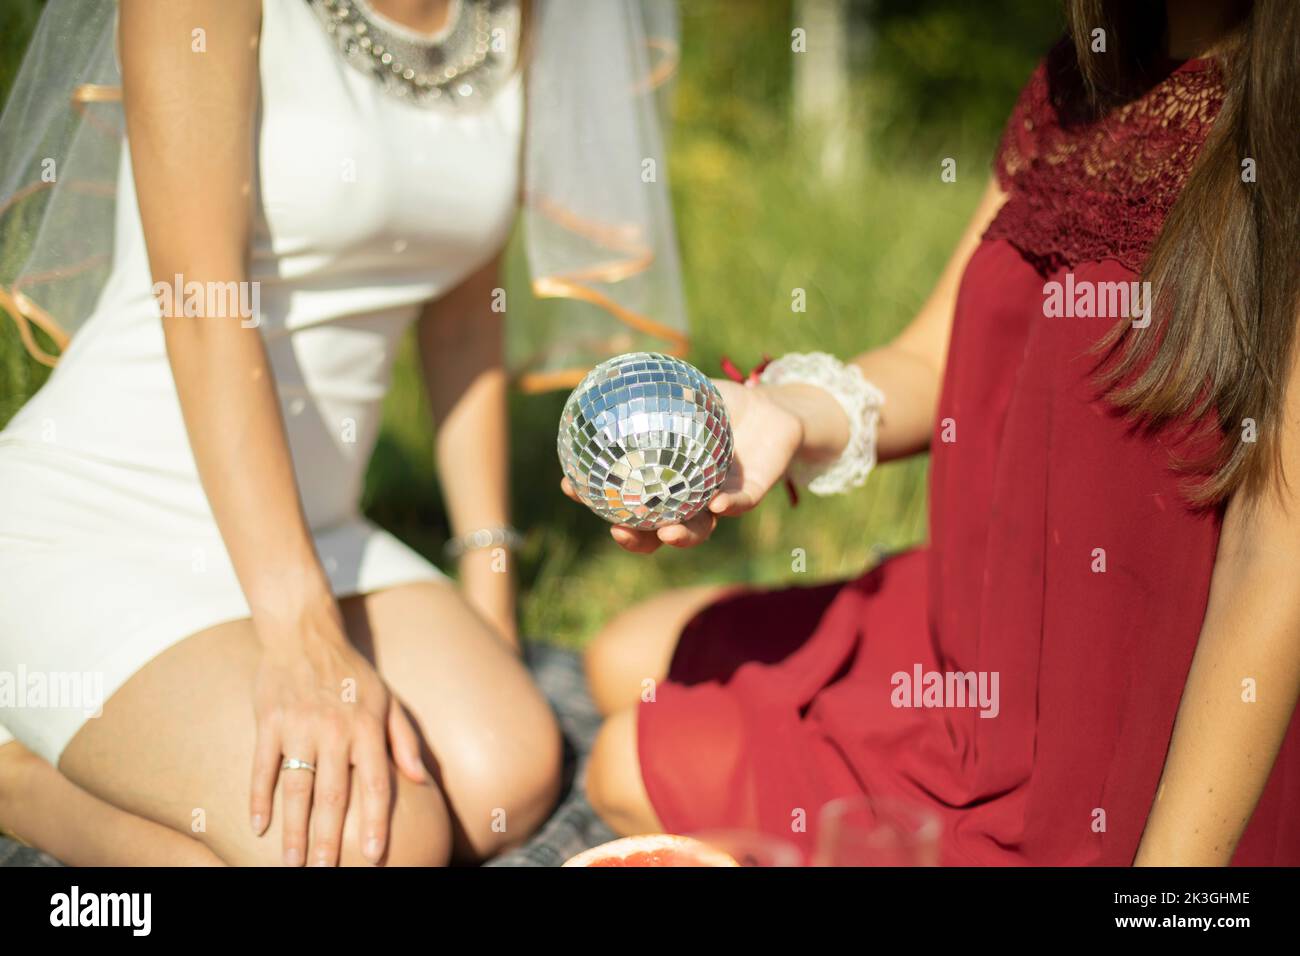 Girls in summer in dresses sit on grass. Girl holds ball in her hand. Mirror ball in palm of your hand. Details of outdoor recreation. Stock Photo